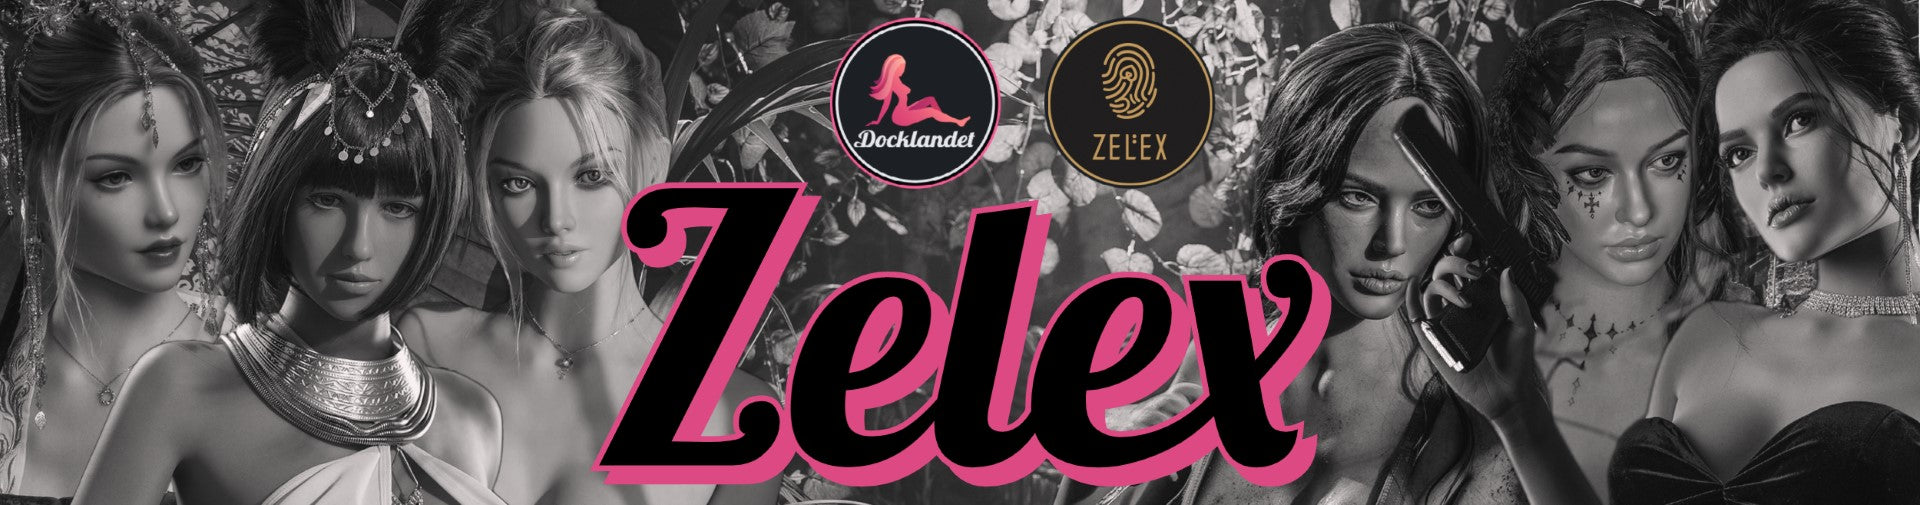 Zelex are experts in real dolls and sex dolls. Their dolls are made of the absolute highest quality TPE and silicone (imported from the USA). Buy your Zelex real doll at Docklandet today. Zelex is one of China's leading manufacturers of lifelike dolls.